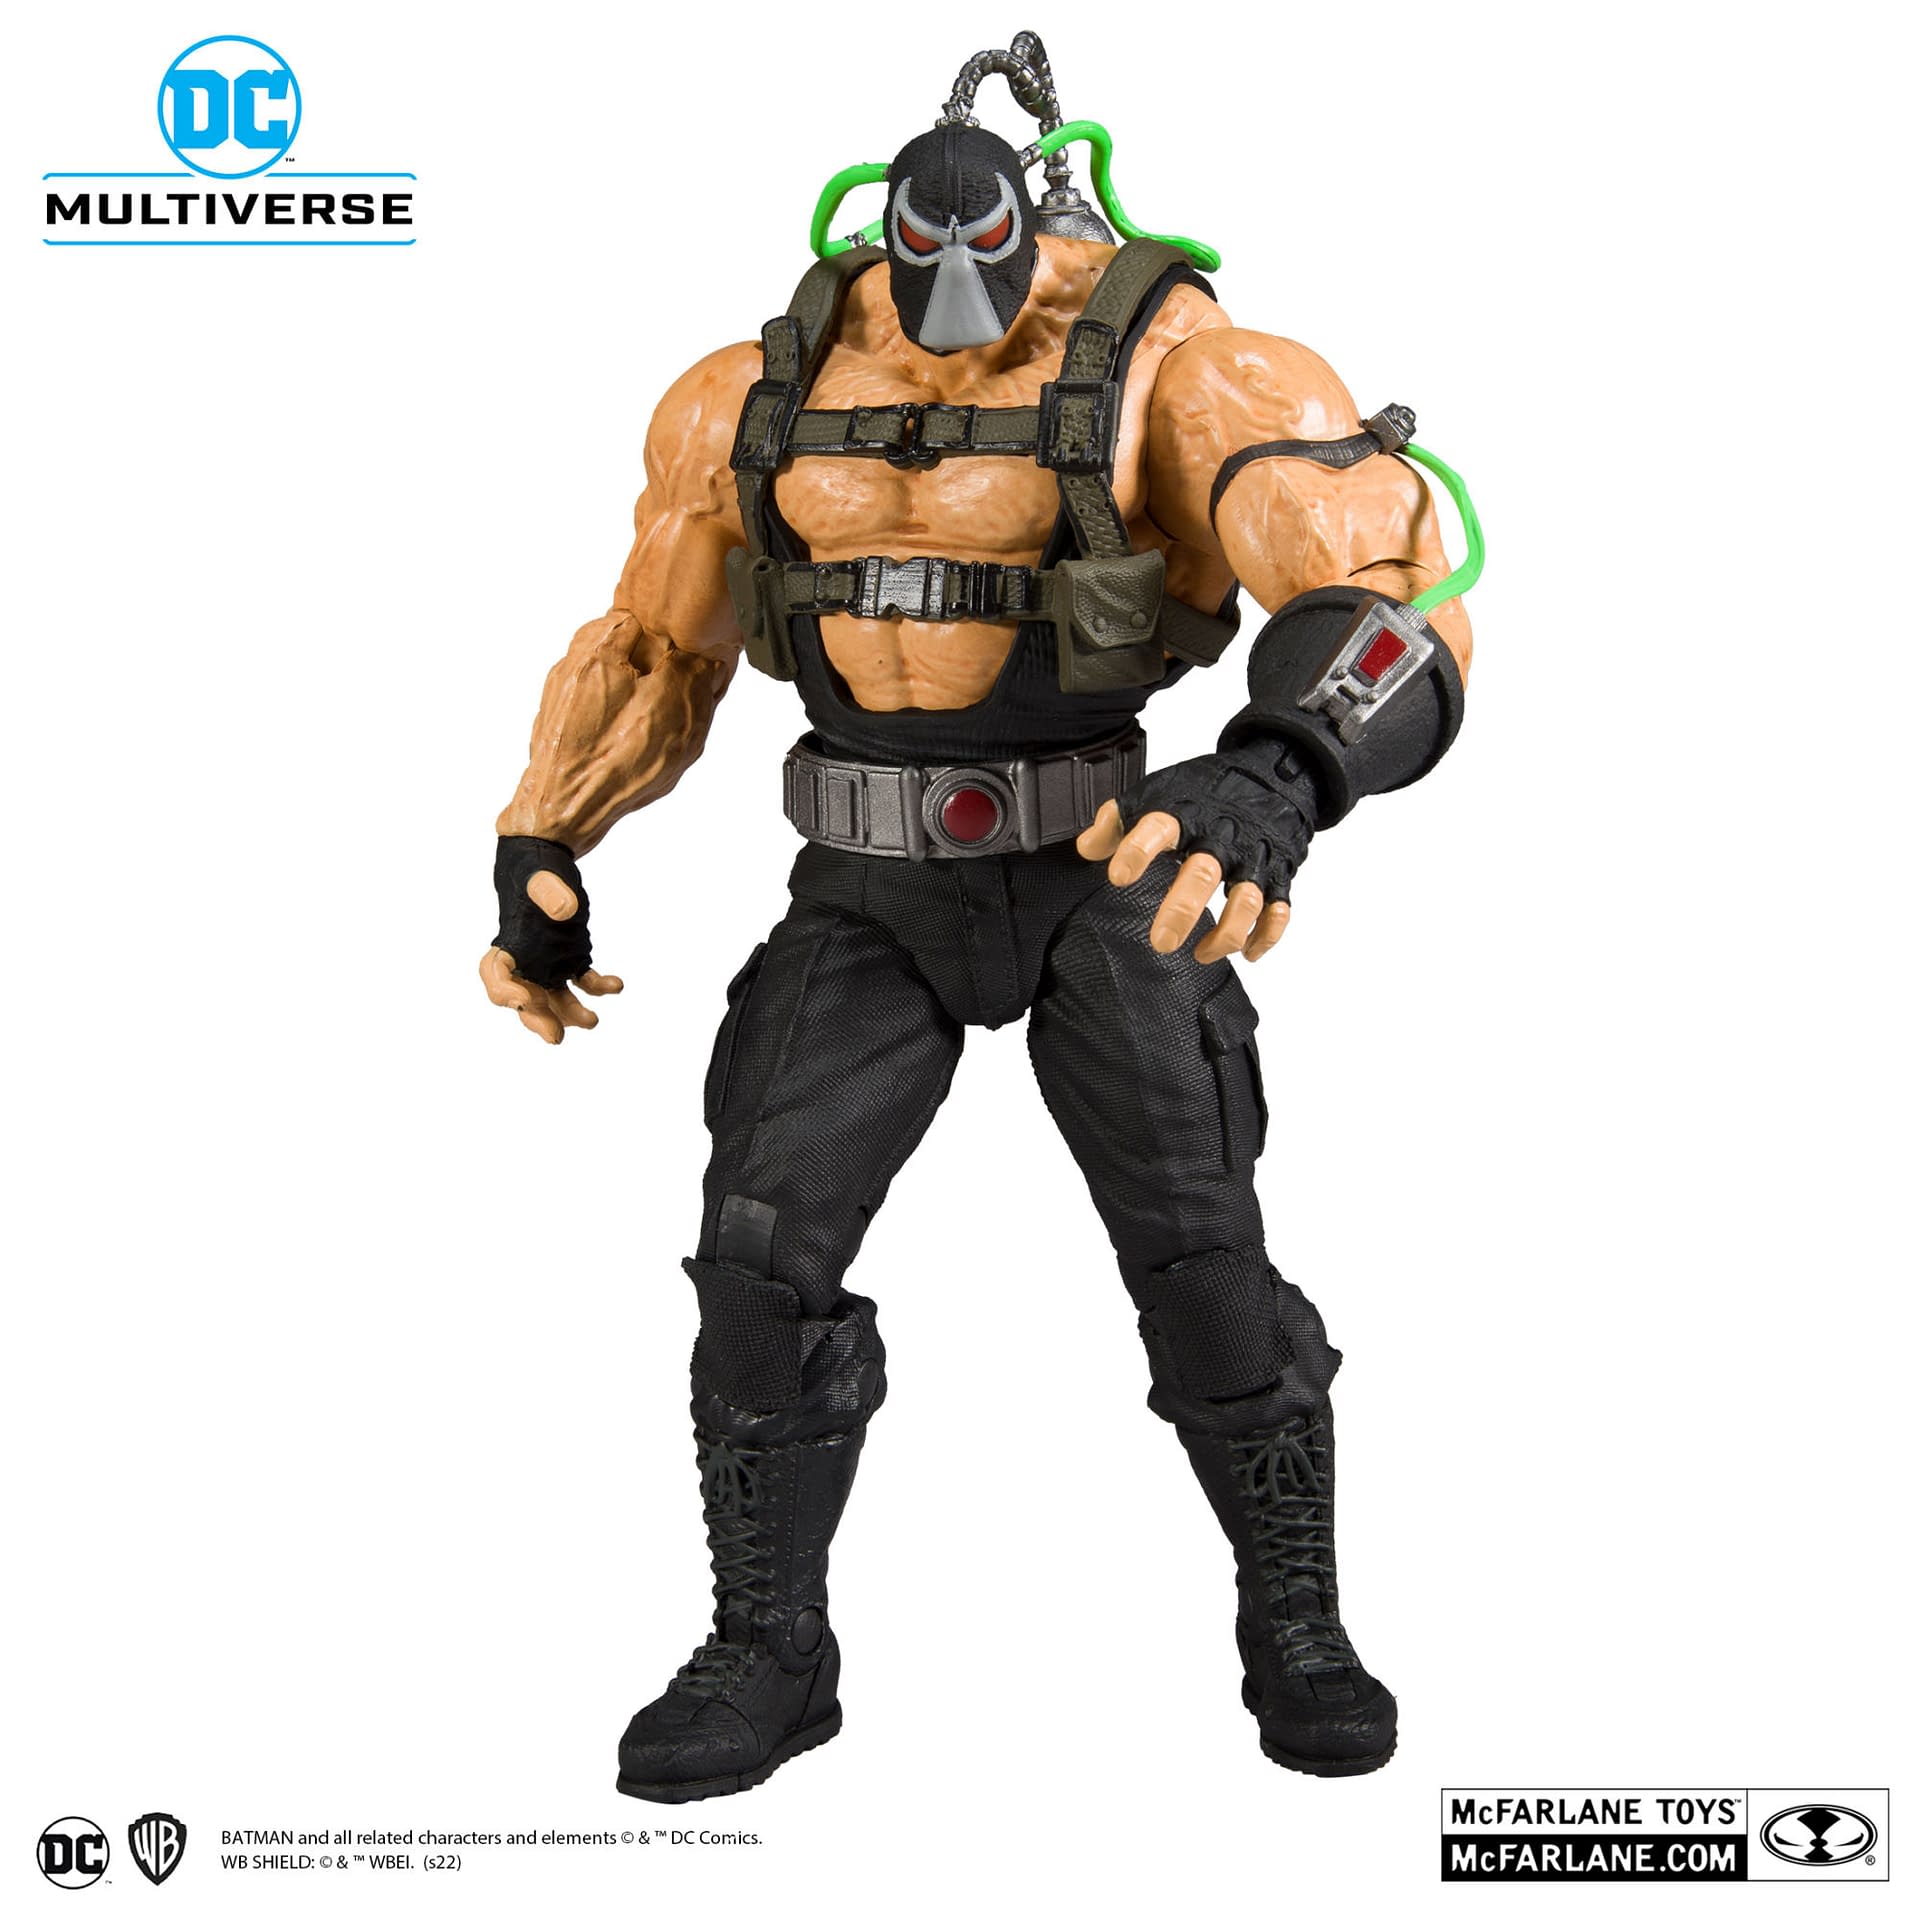 It's Time to Break the Bat with McFarlane's New DC Comics Bane MegaFig